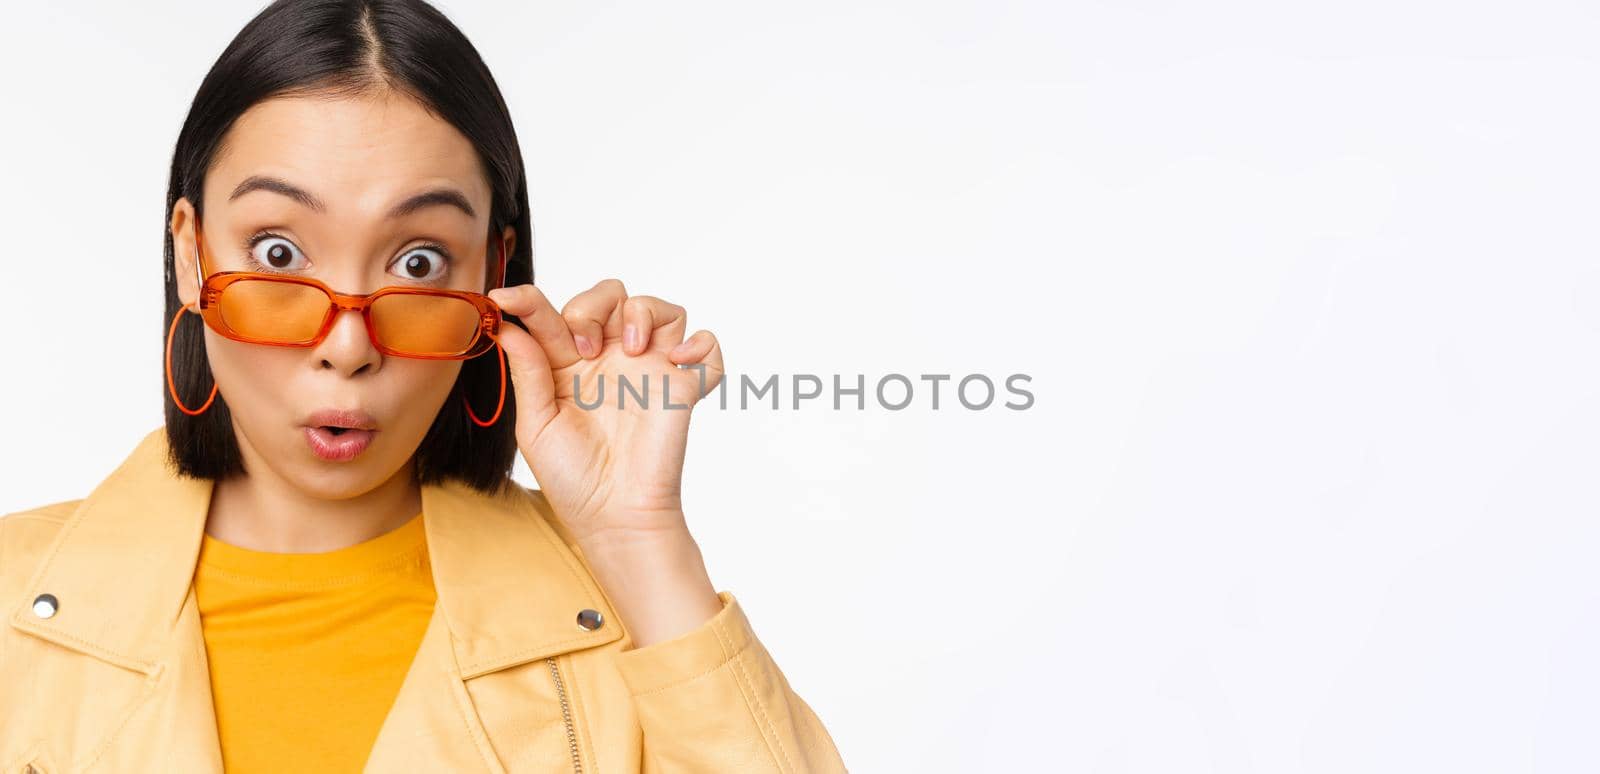 Close up portrait of asian girl looking surprised, wow face, takes off sunglasses and staring impressed at camera, standing over white background.